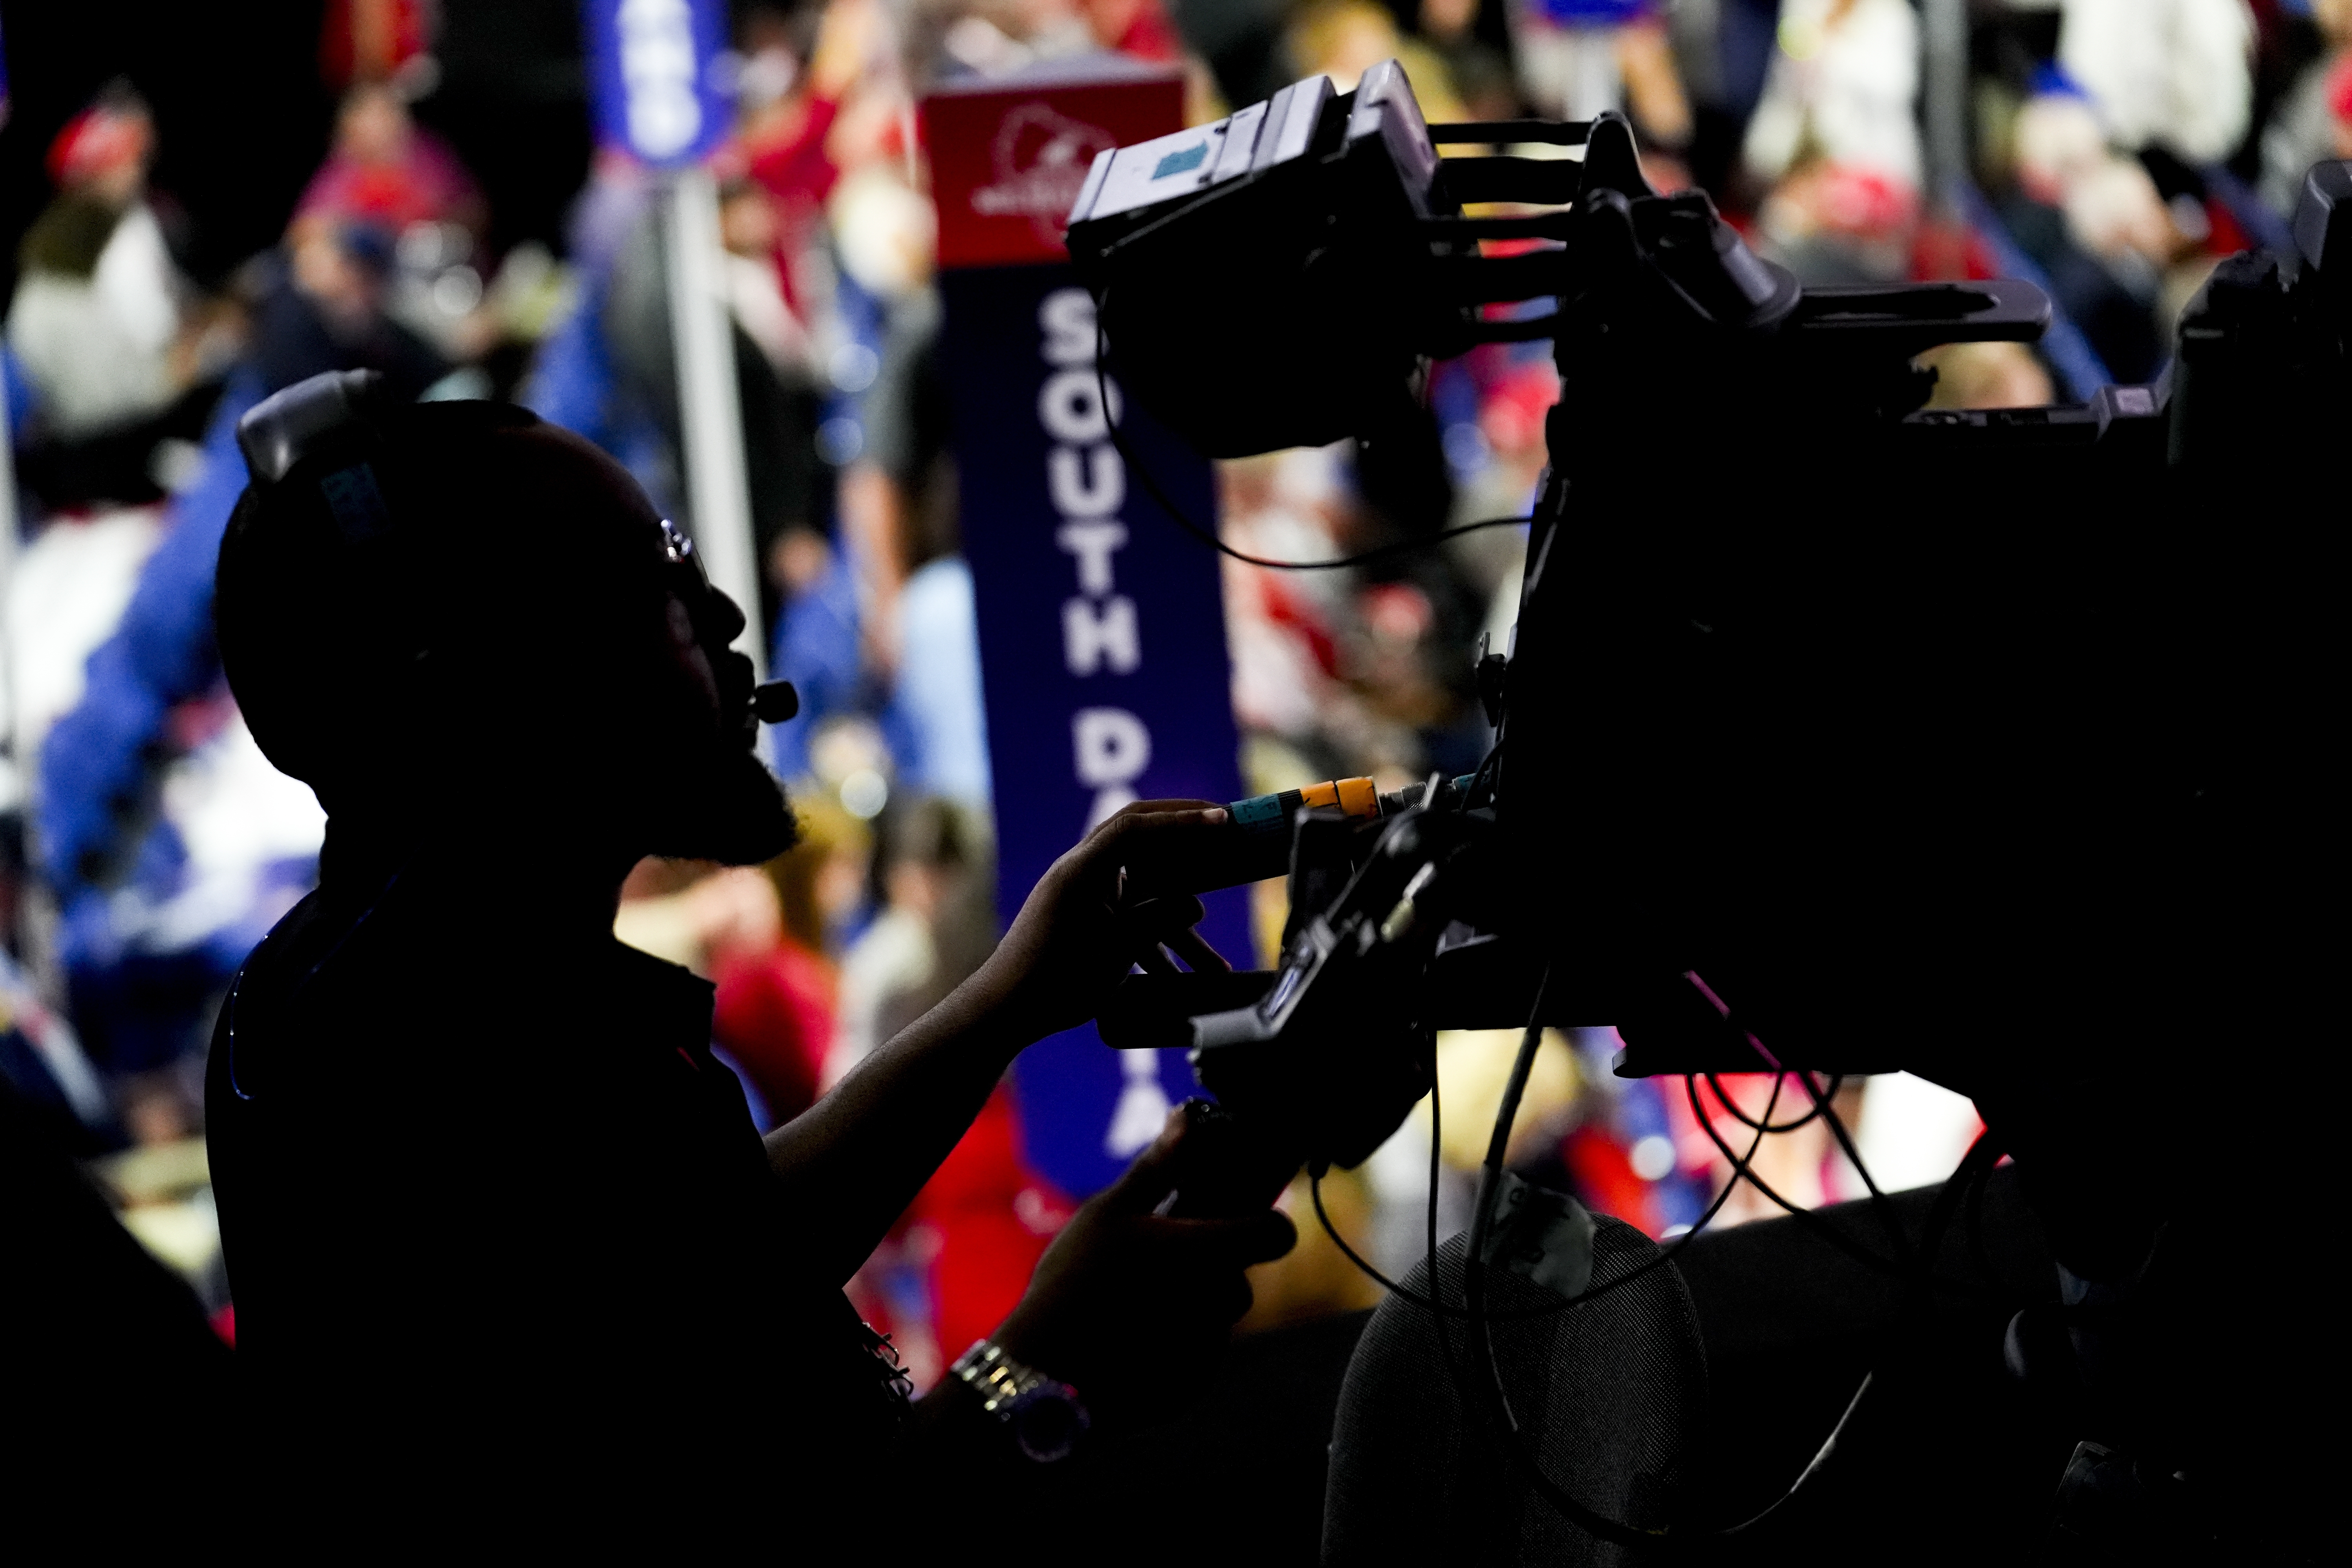 A television camera operator is seen during the Republican National Convention Tuesday, July 16, 2024, in Milwaukee. (AP Photo/Charles Rex Arbogast)